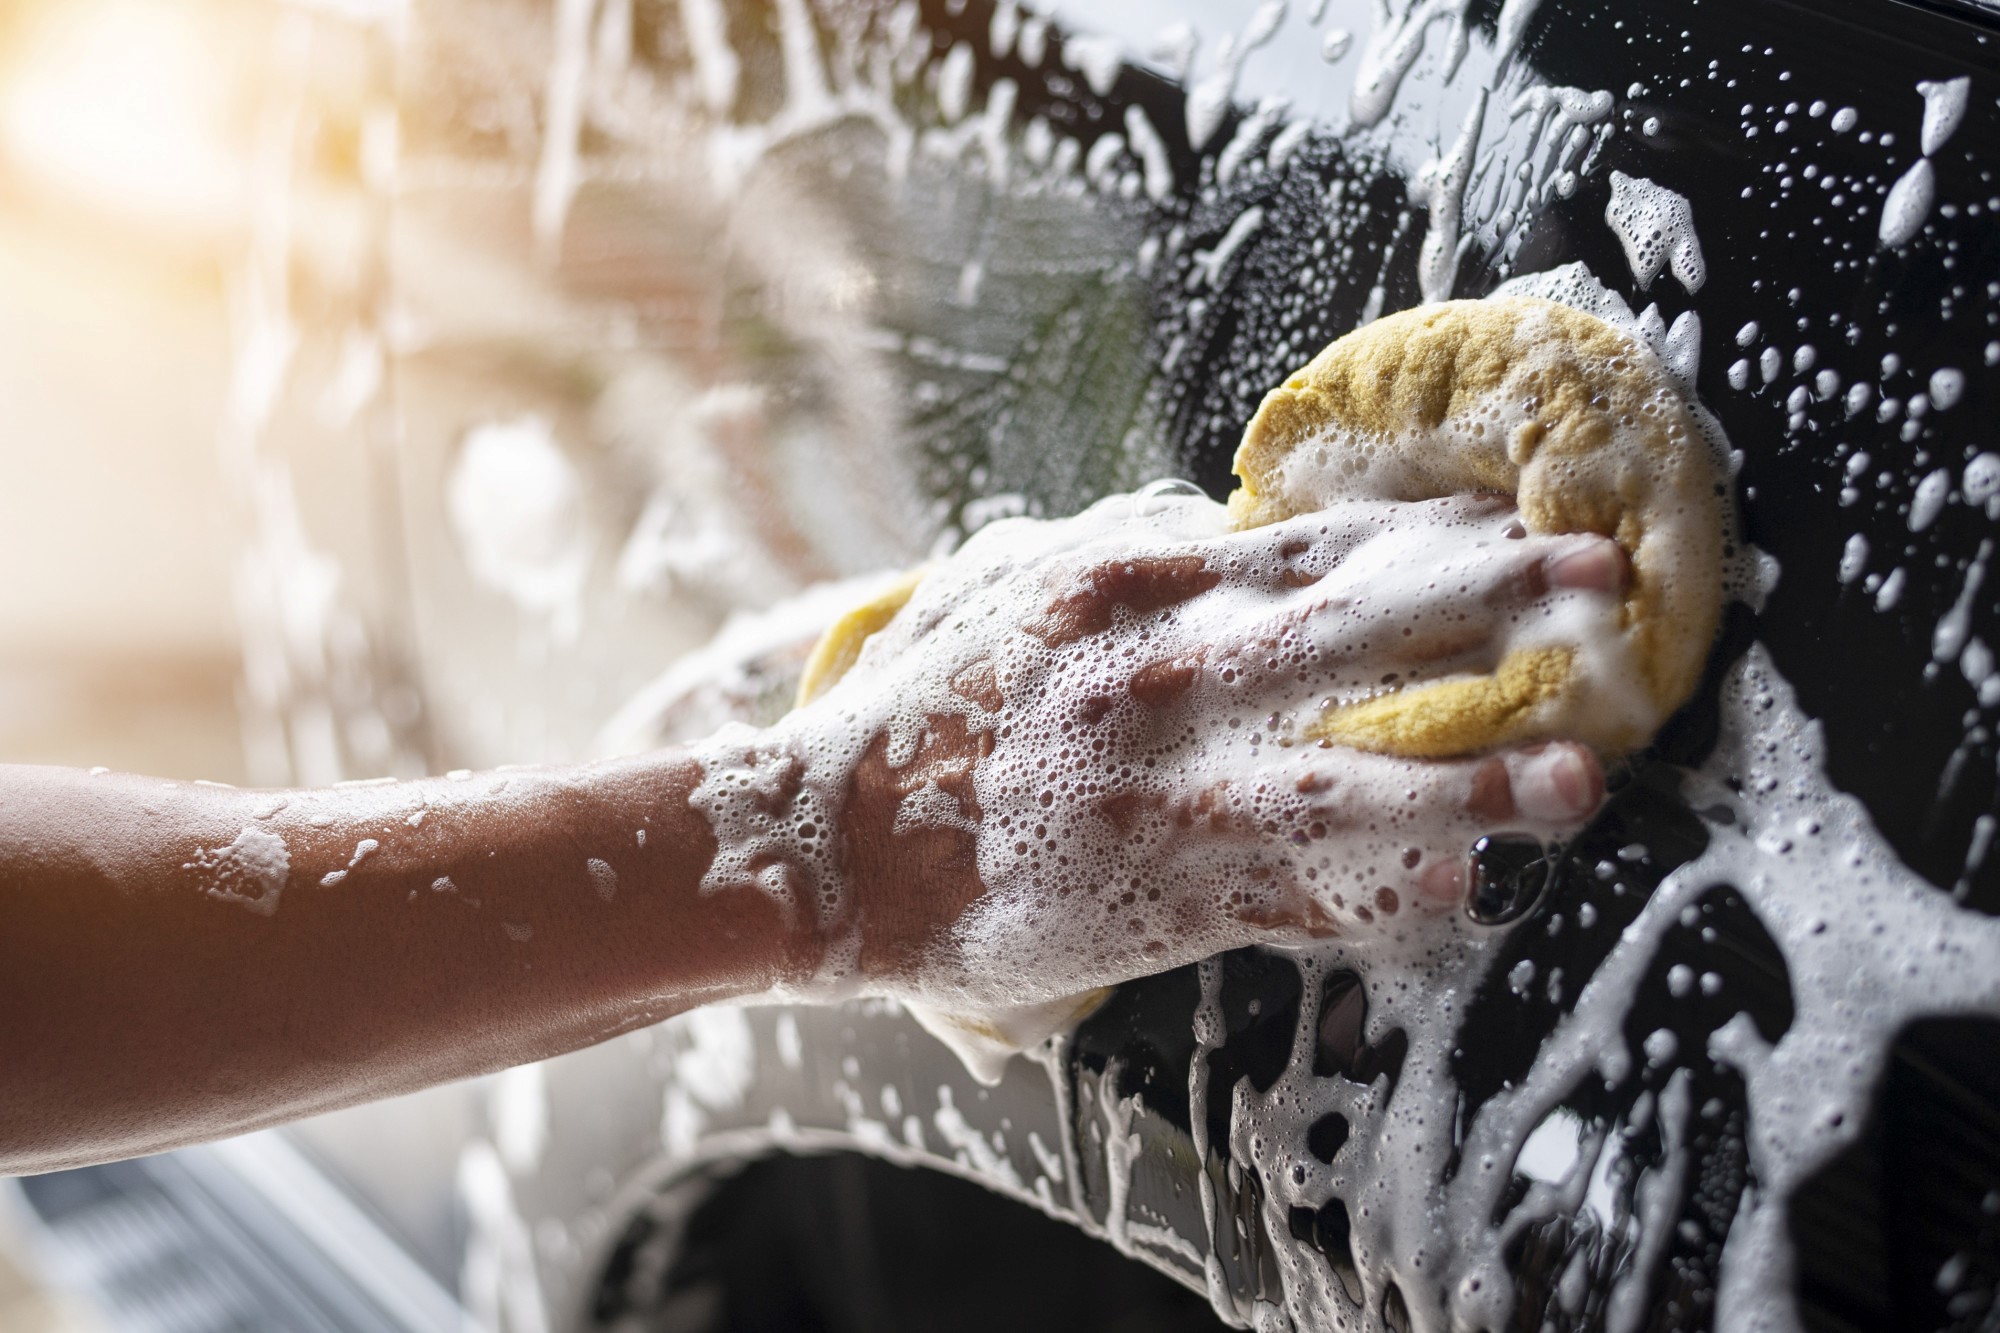 6 Common Car Cleaning Errors and How to Avoid Them